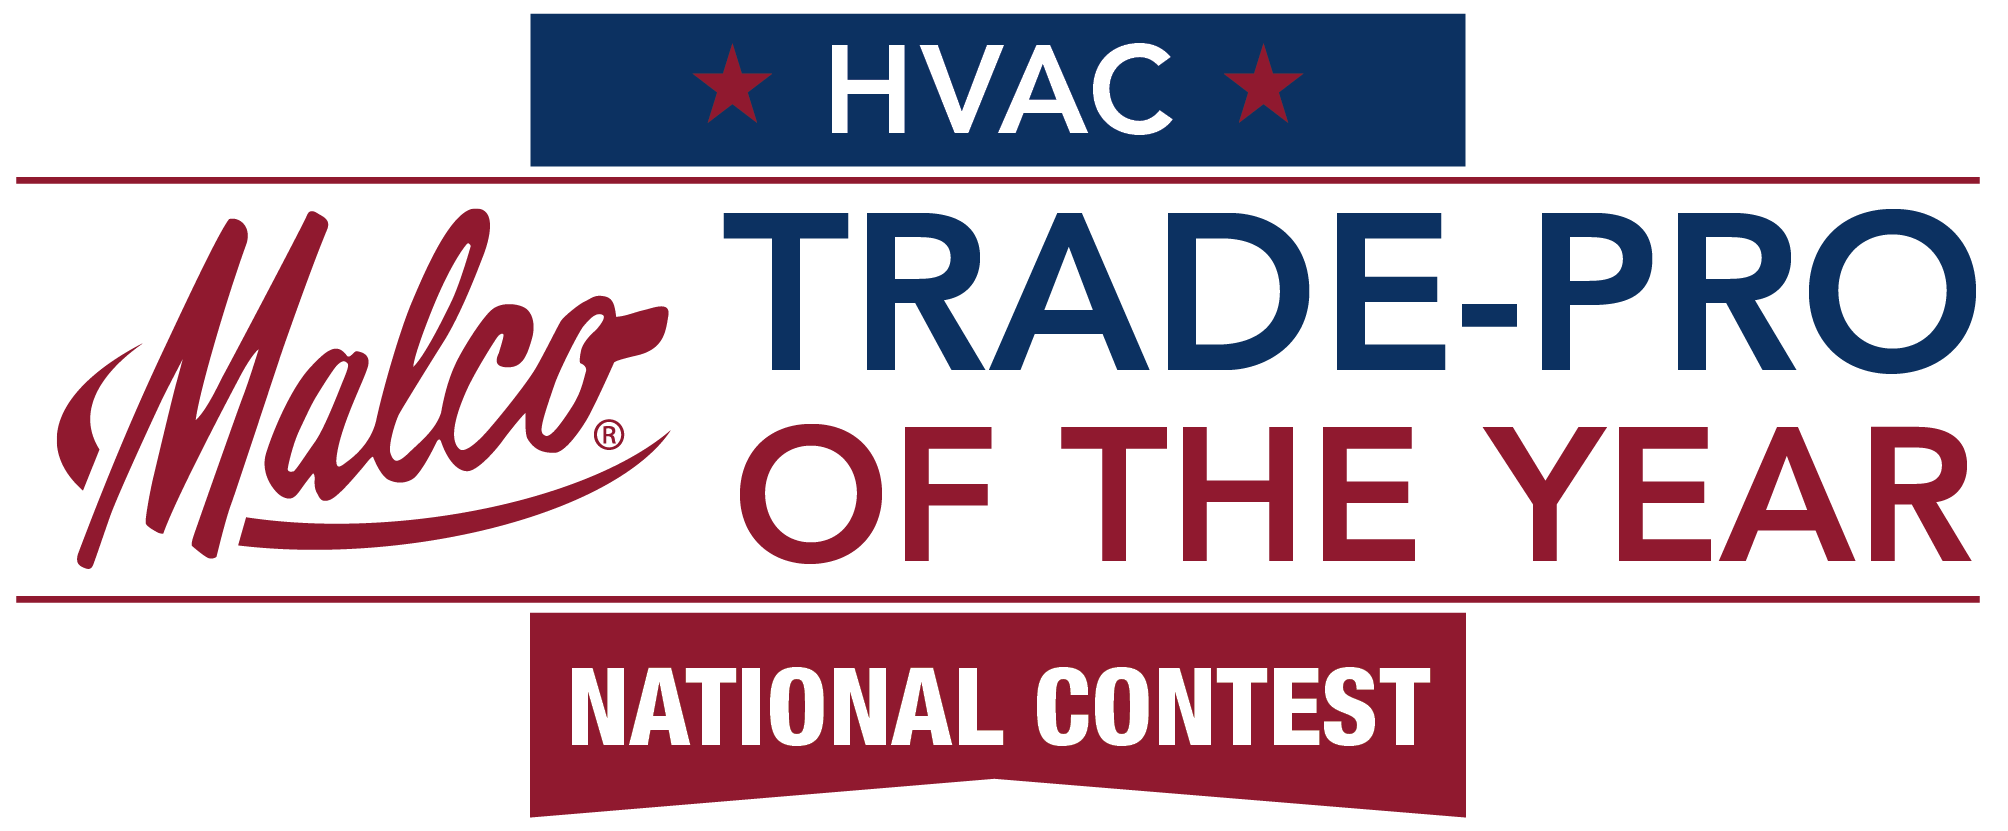 HVAC Professionals of the year